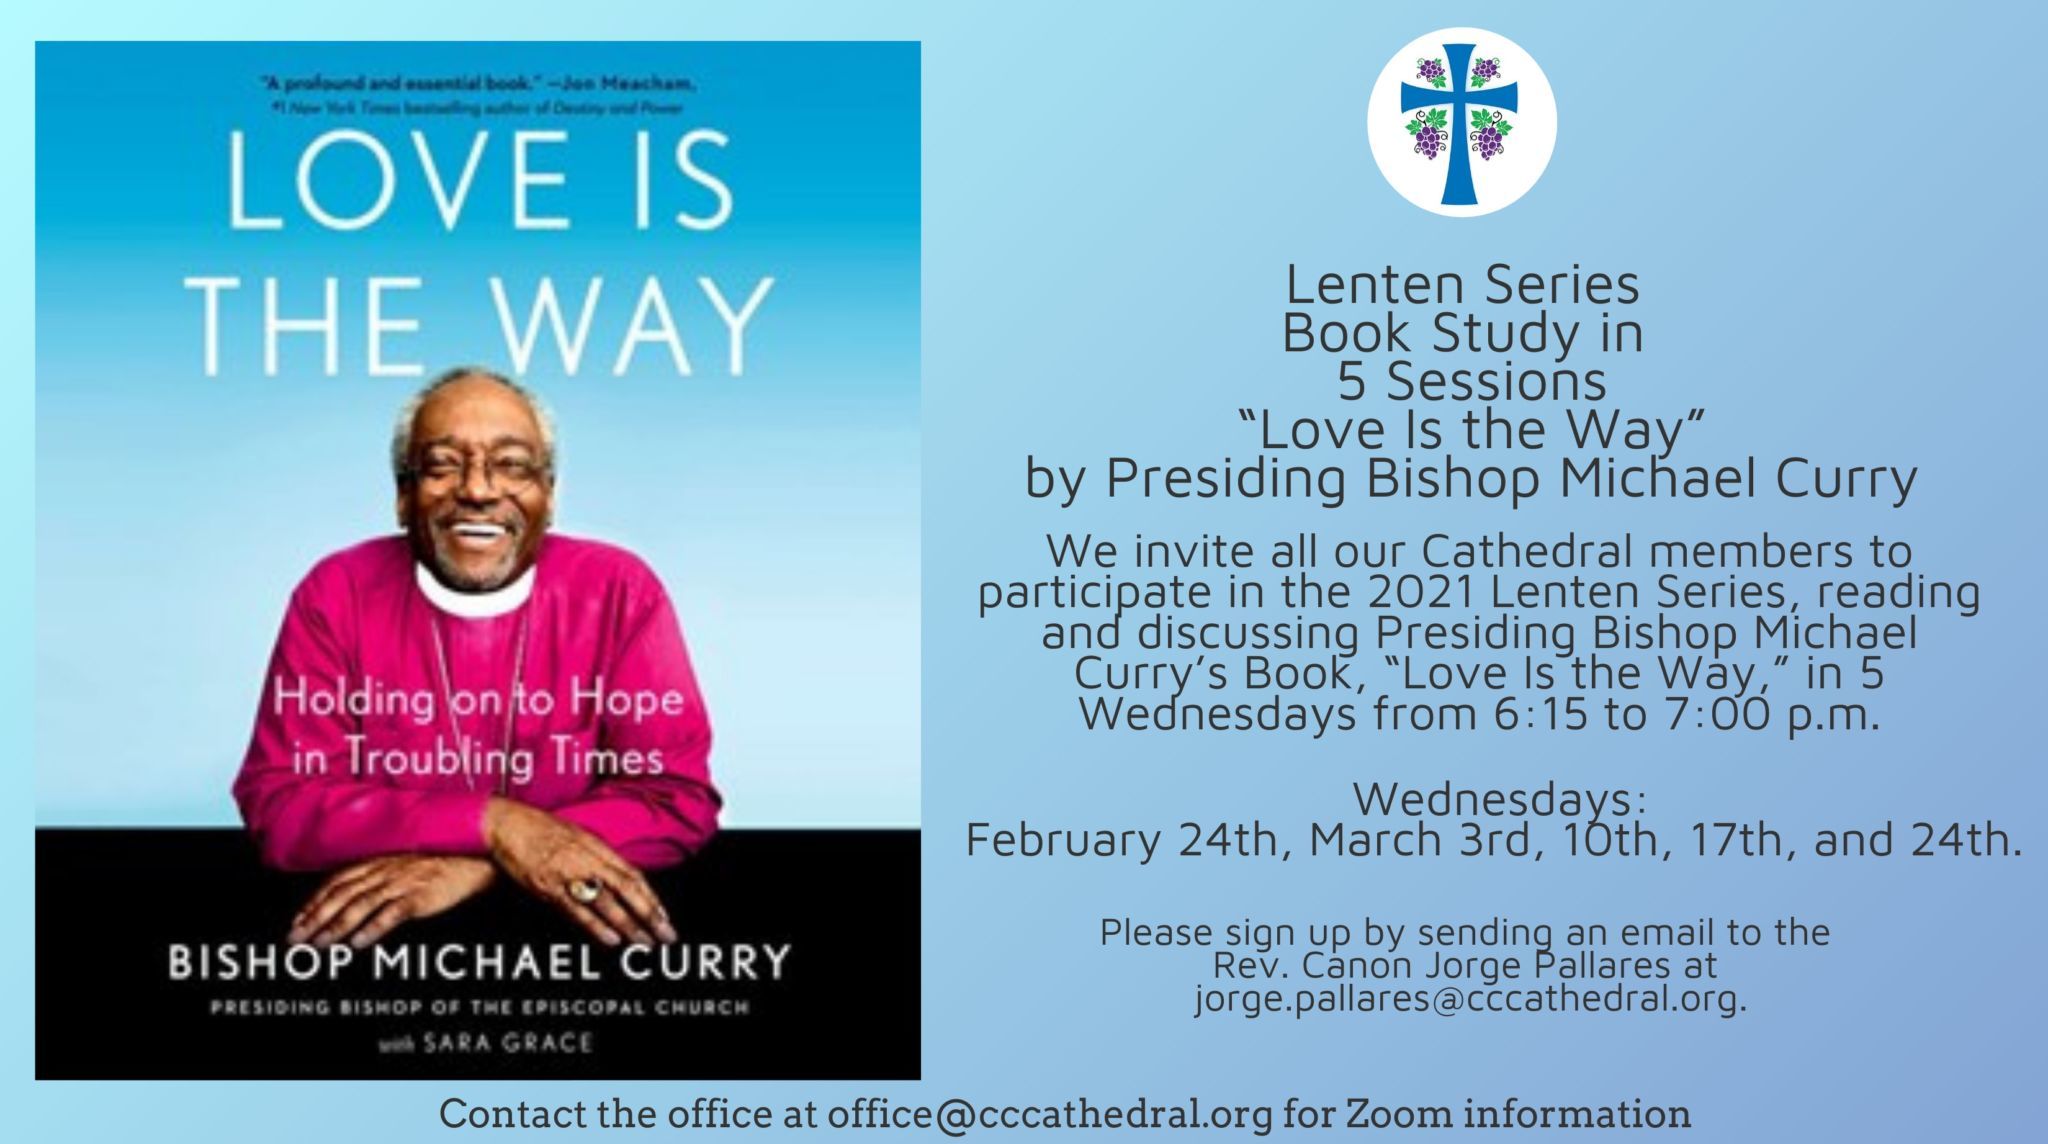 Lenten Series  Book Study in  5 Sessions “Love Is the Way” by Presiding Bishop Michael Curry